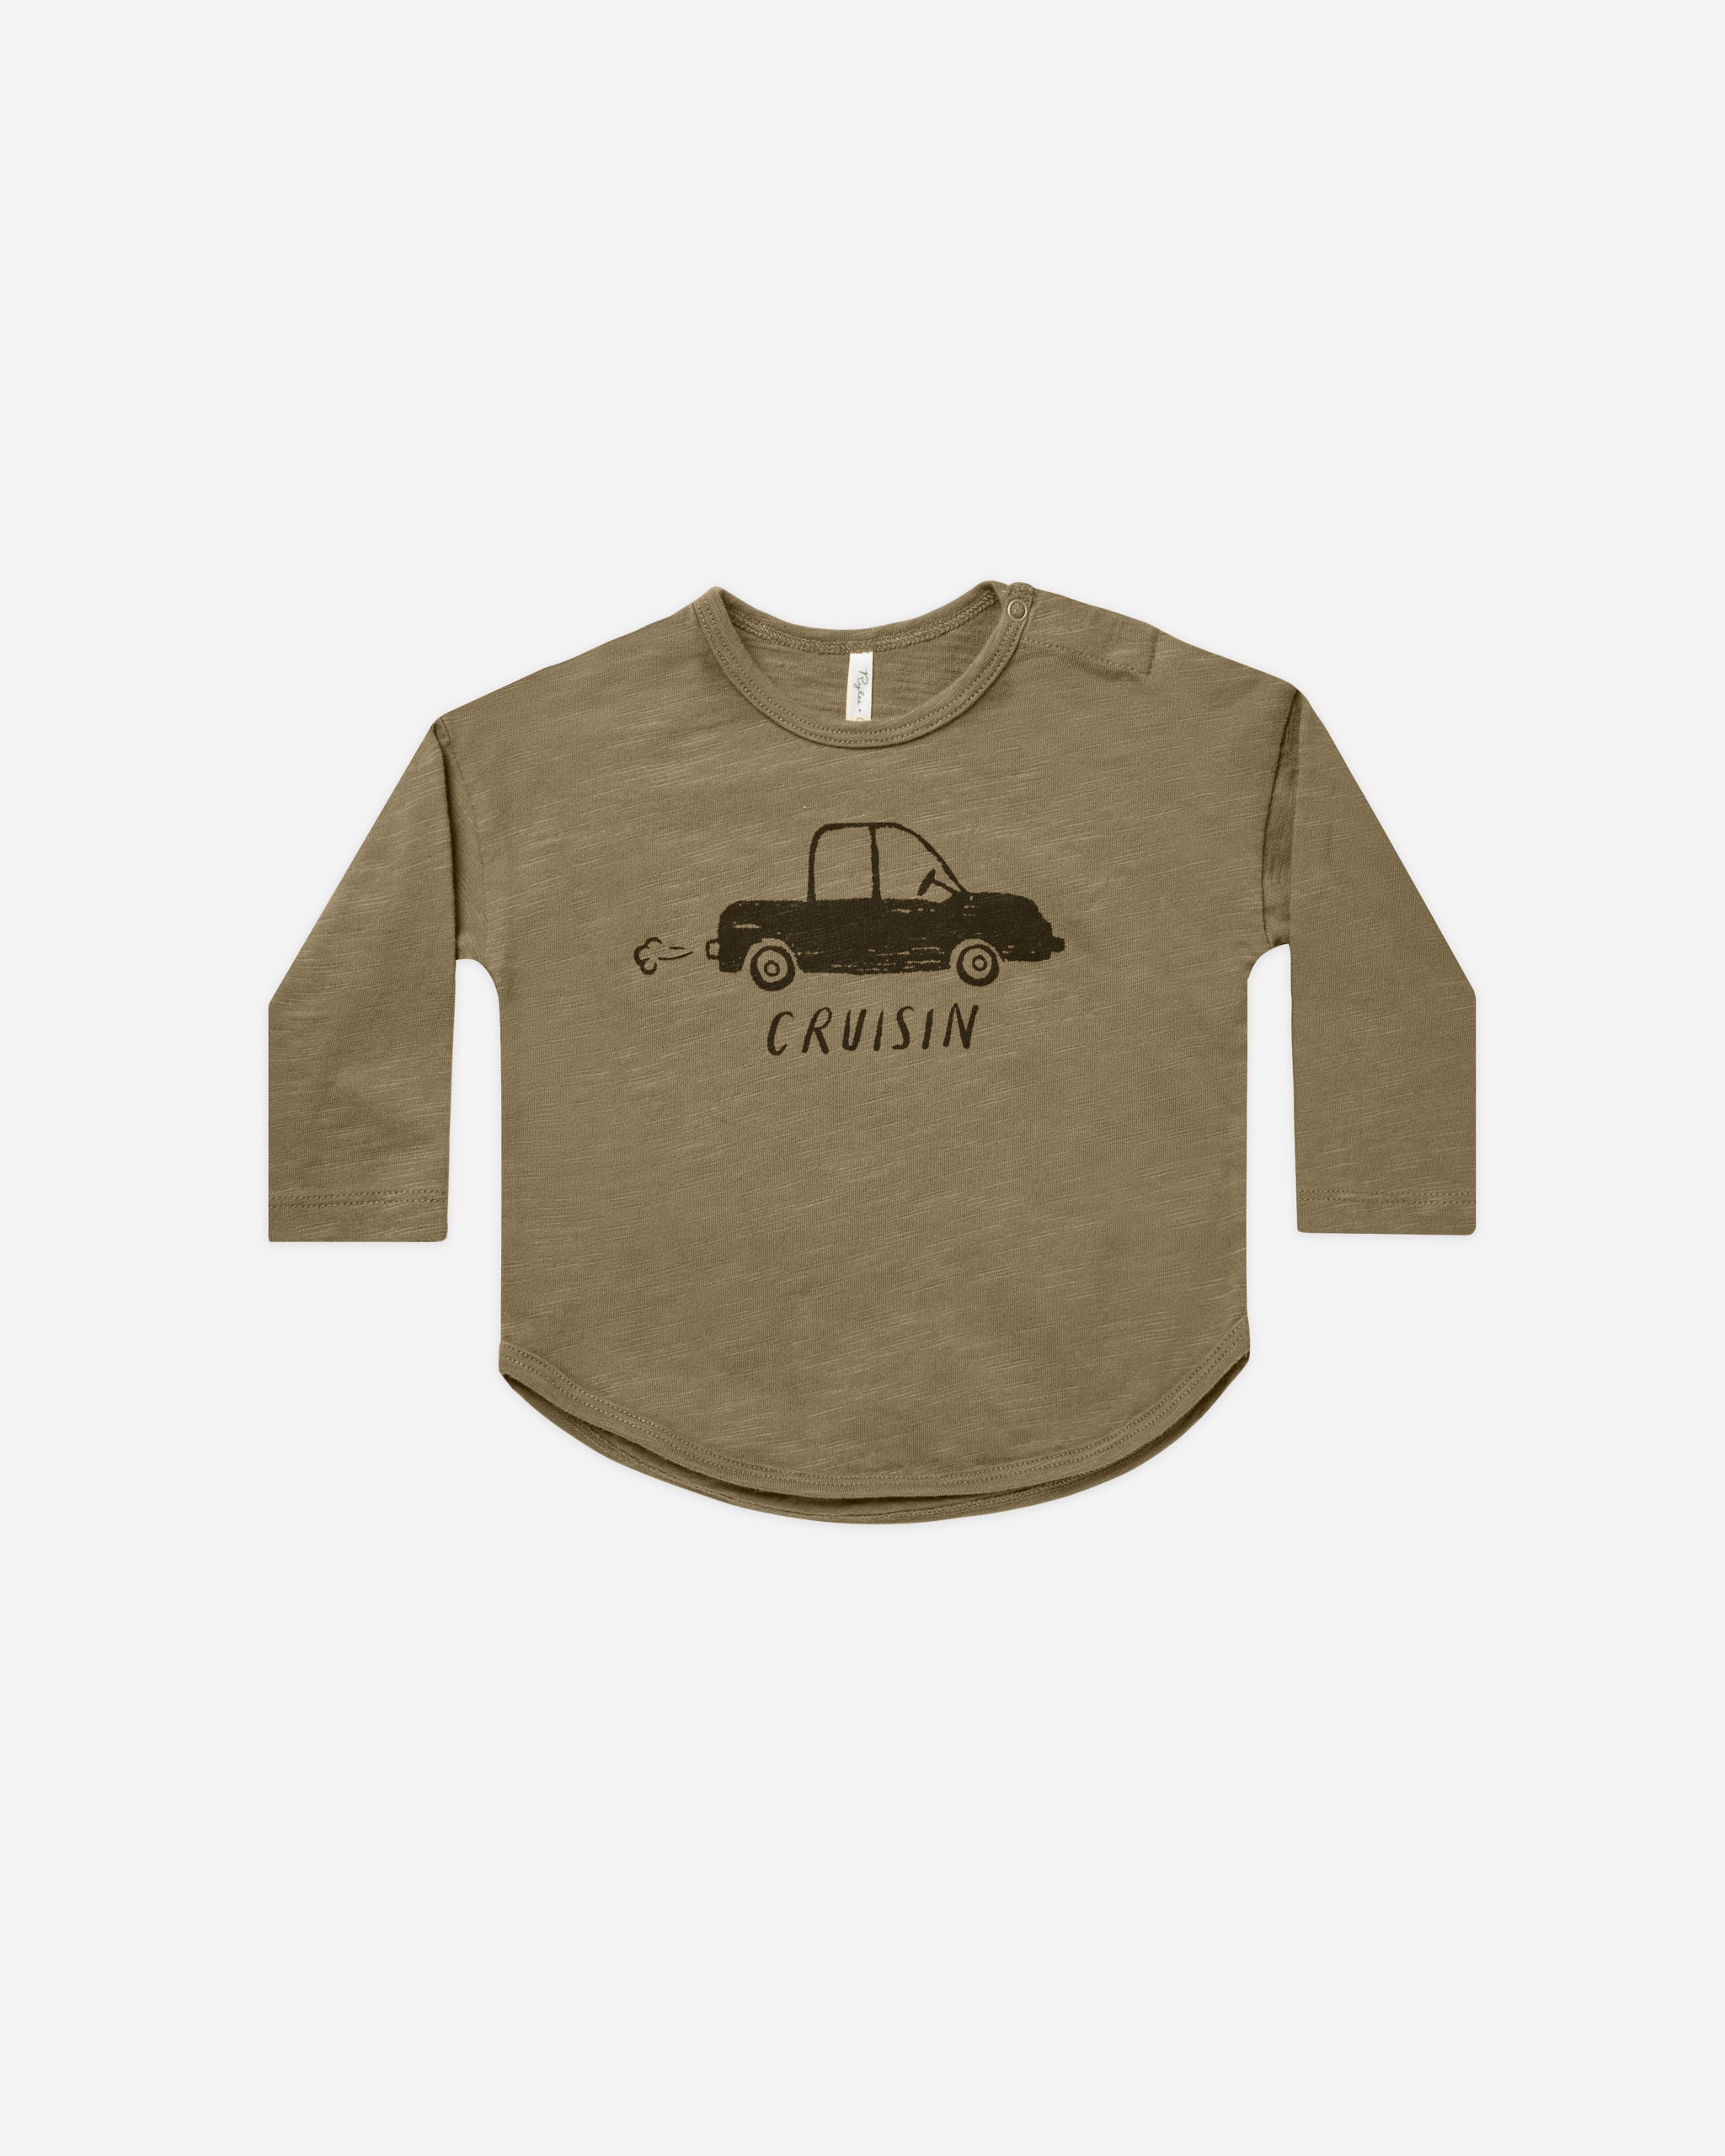 Long Sleeve Tee || Cruisin - Rylee + Cru | Kids Clothes | Trendy Baby Clothes | Modern Infant Outfits |